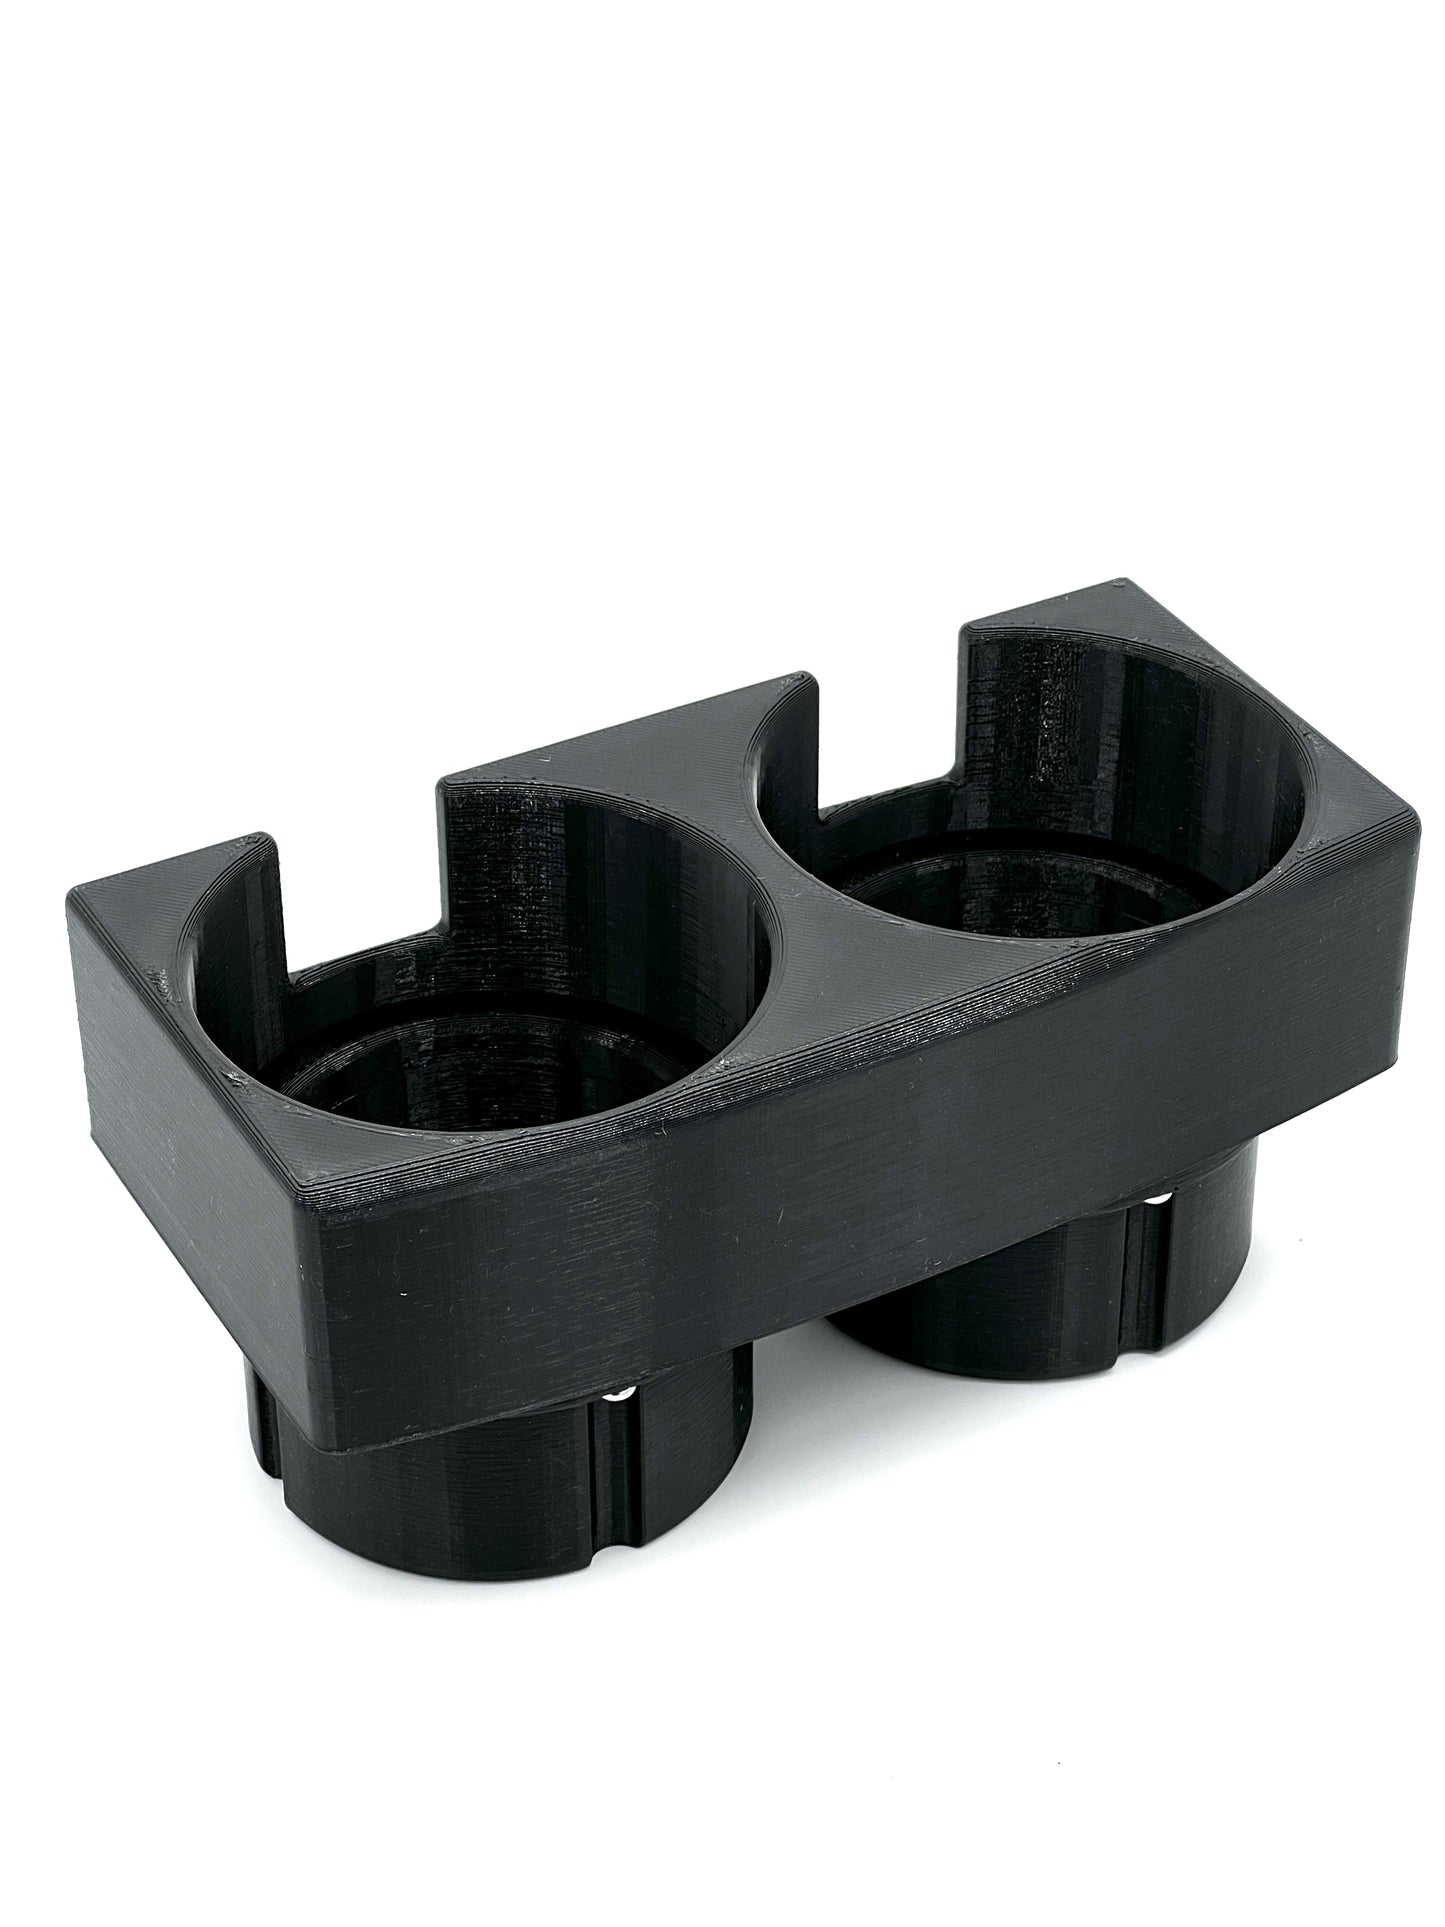 100 Series LC/LX Cup Holders